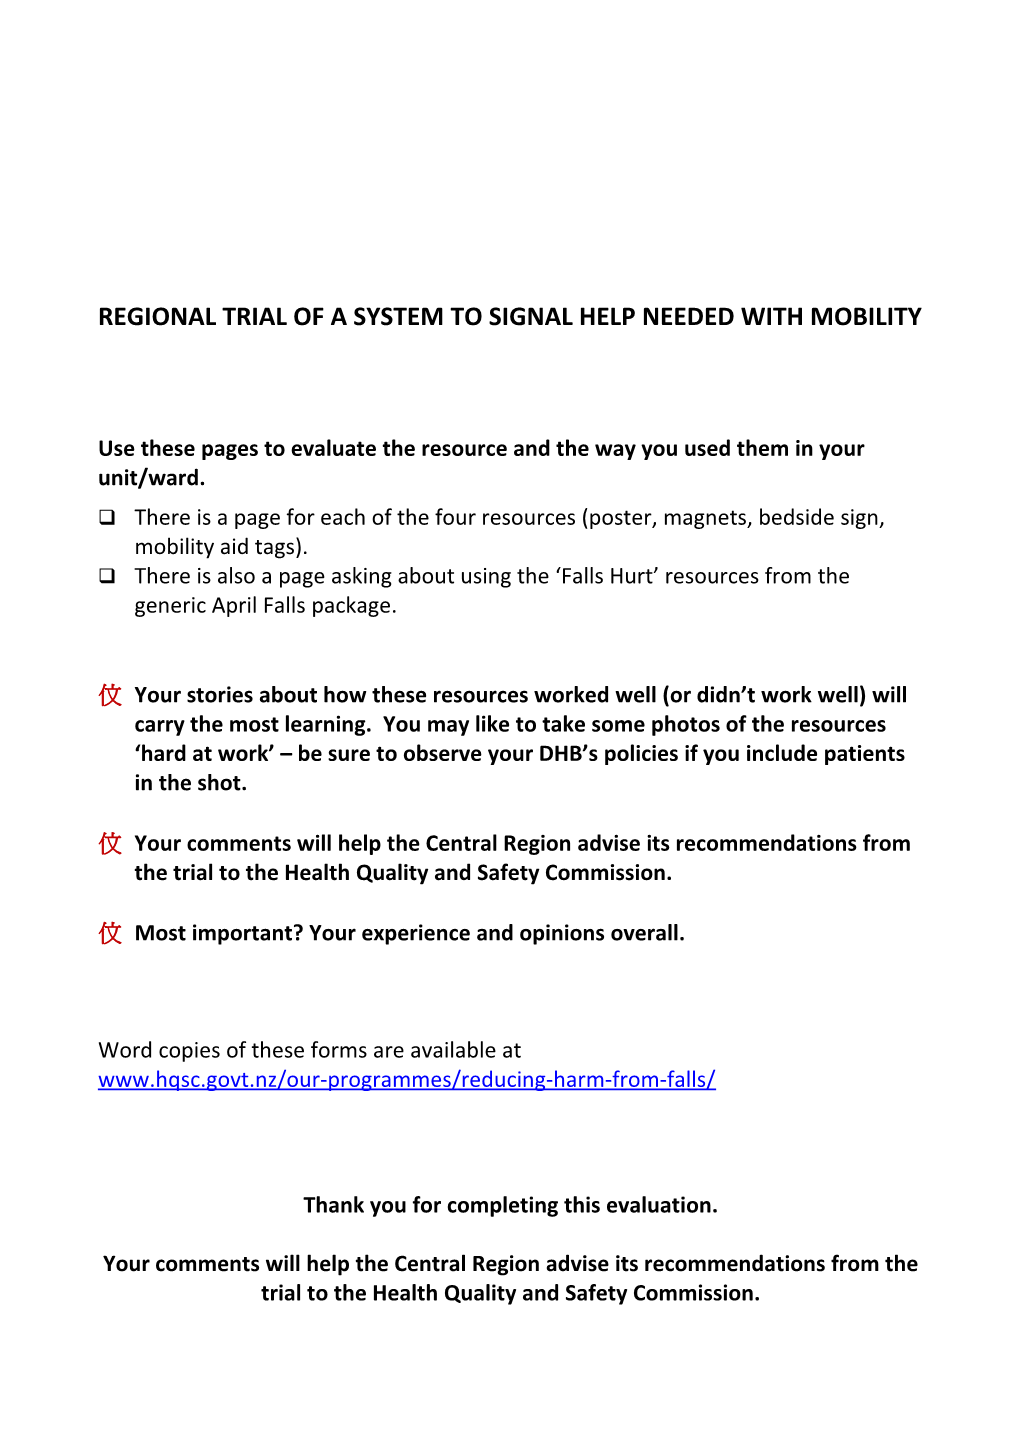 Regional Trial of a System to Signal Help Needed with Mobility